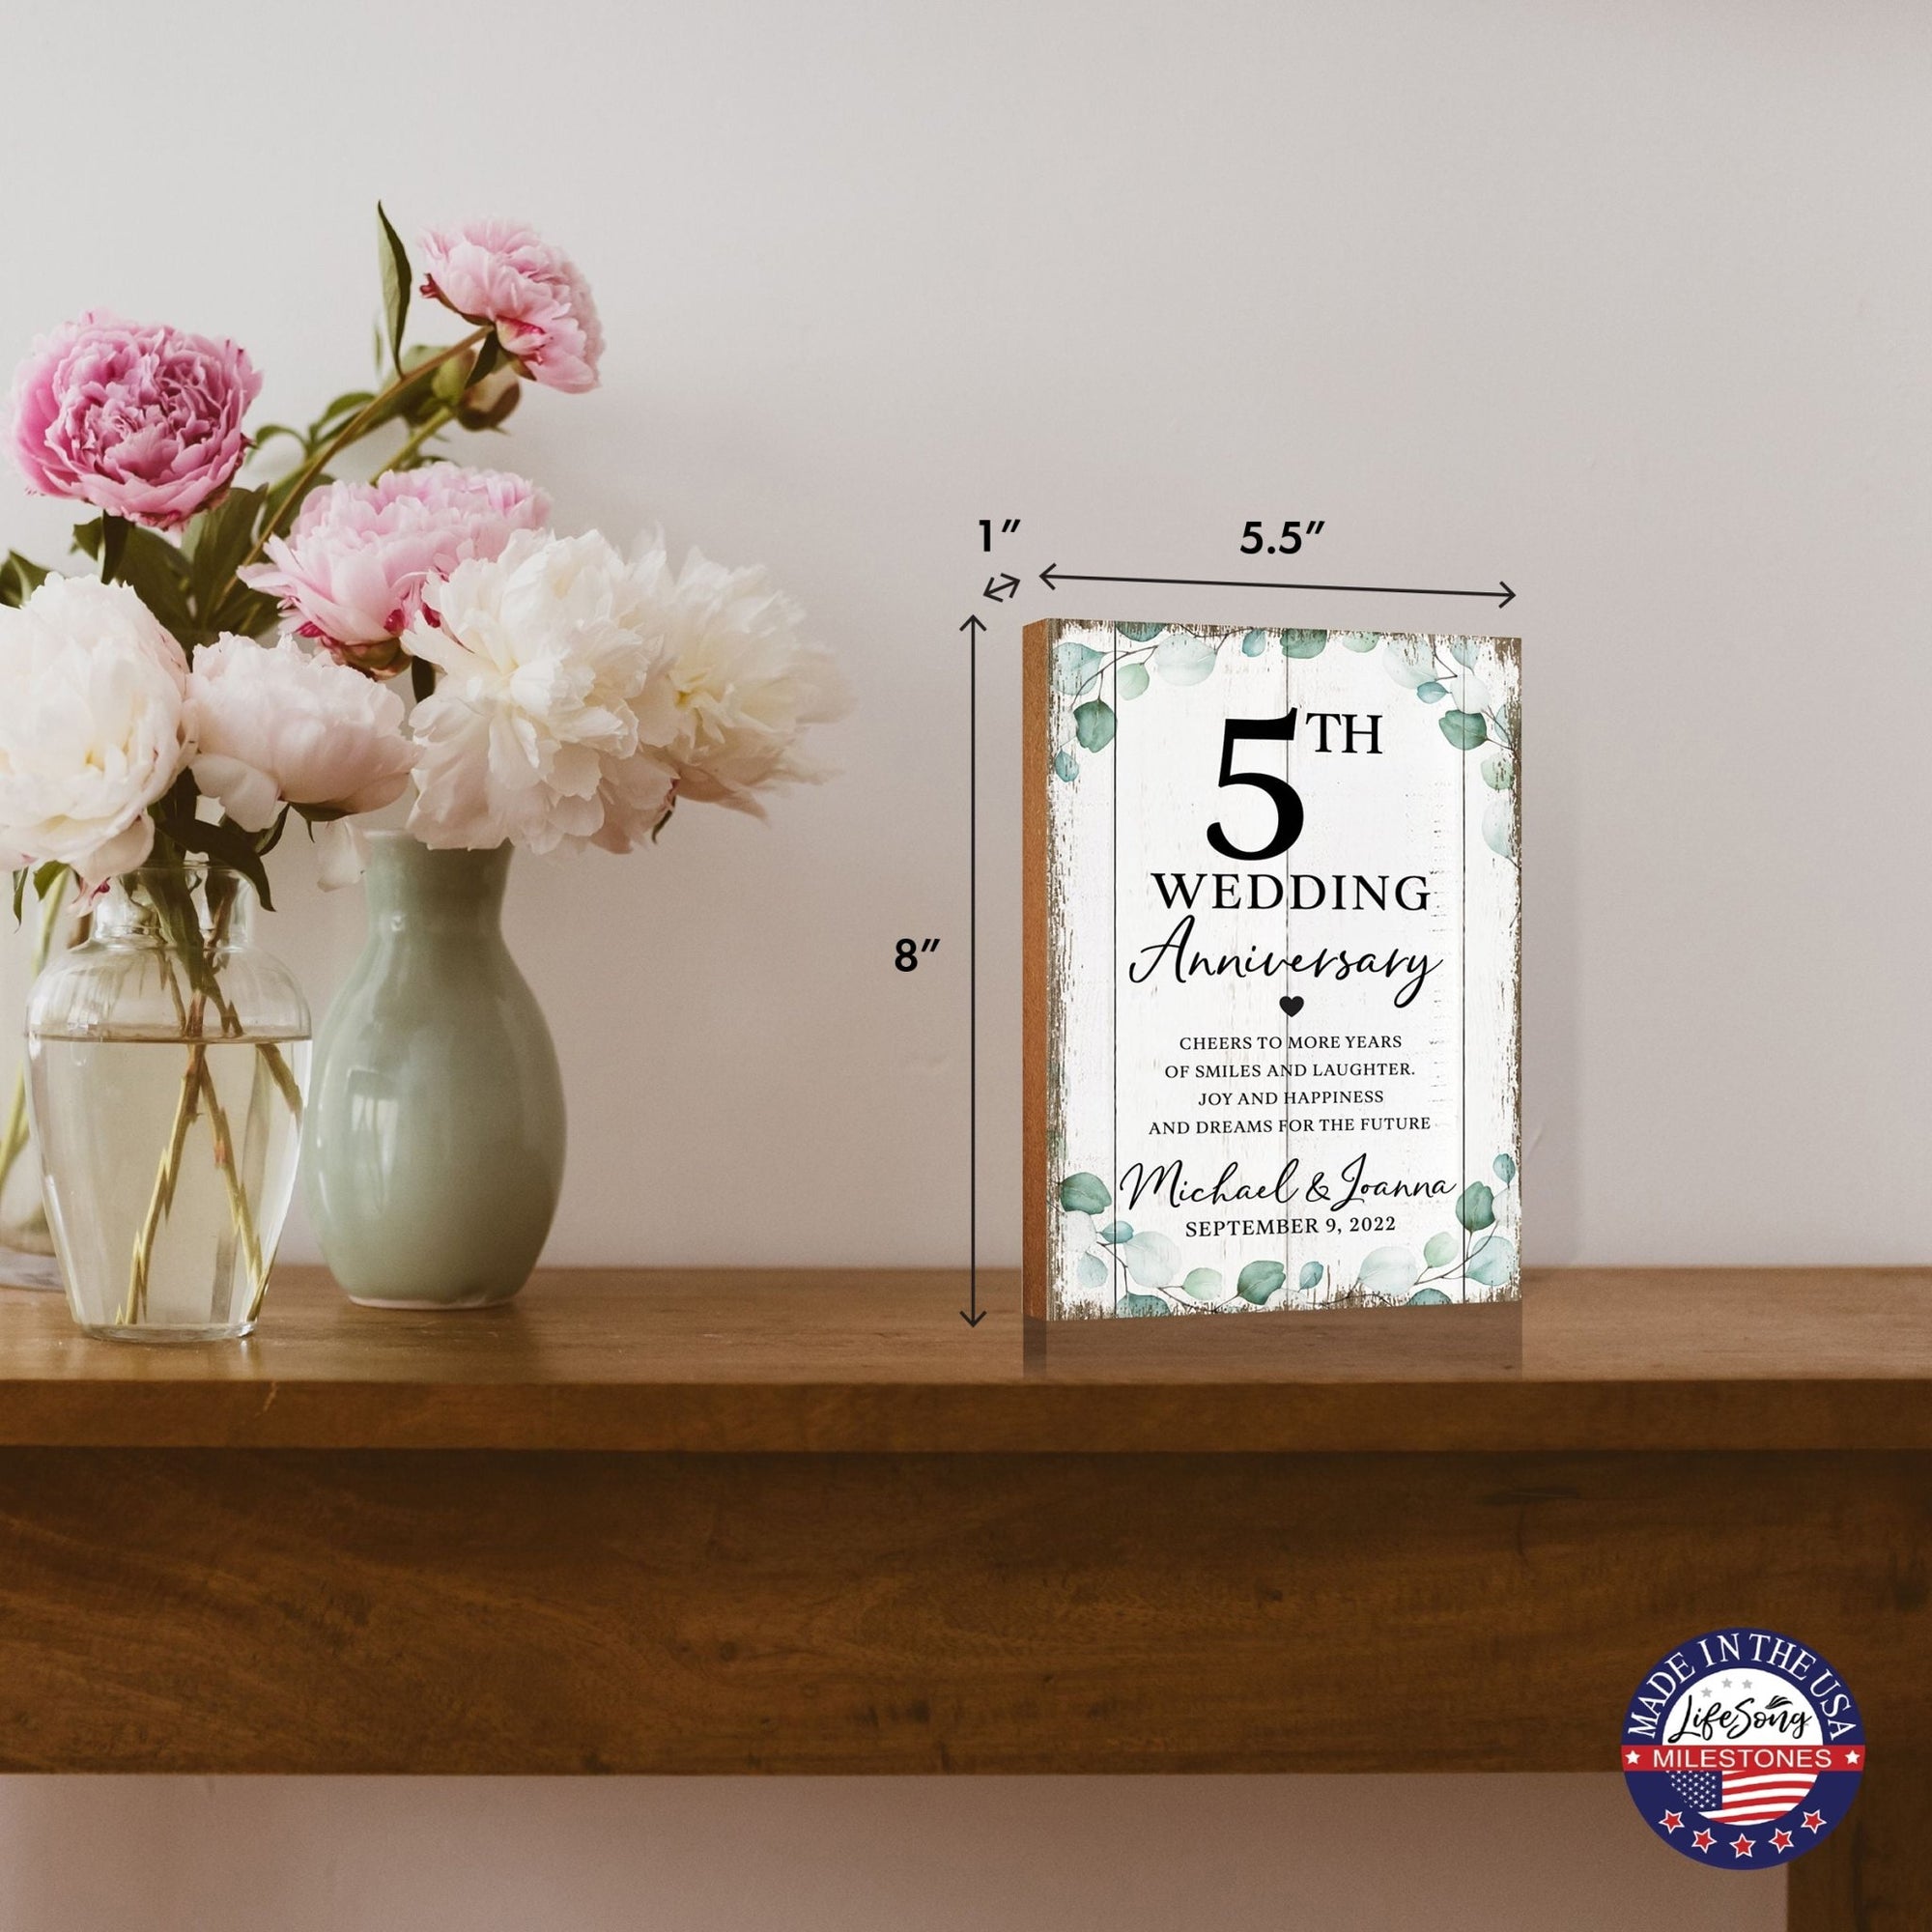 Lifesong Milestones MDF wood shelf decor with digitally printed designs, ideal for celebrating a personalized 5th wedding anniversary.